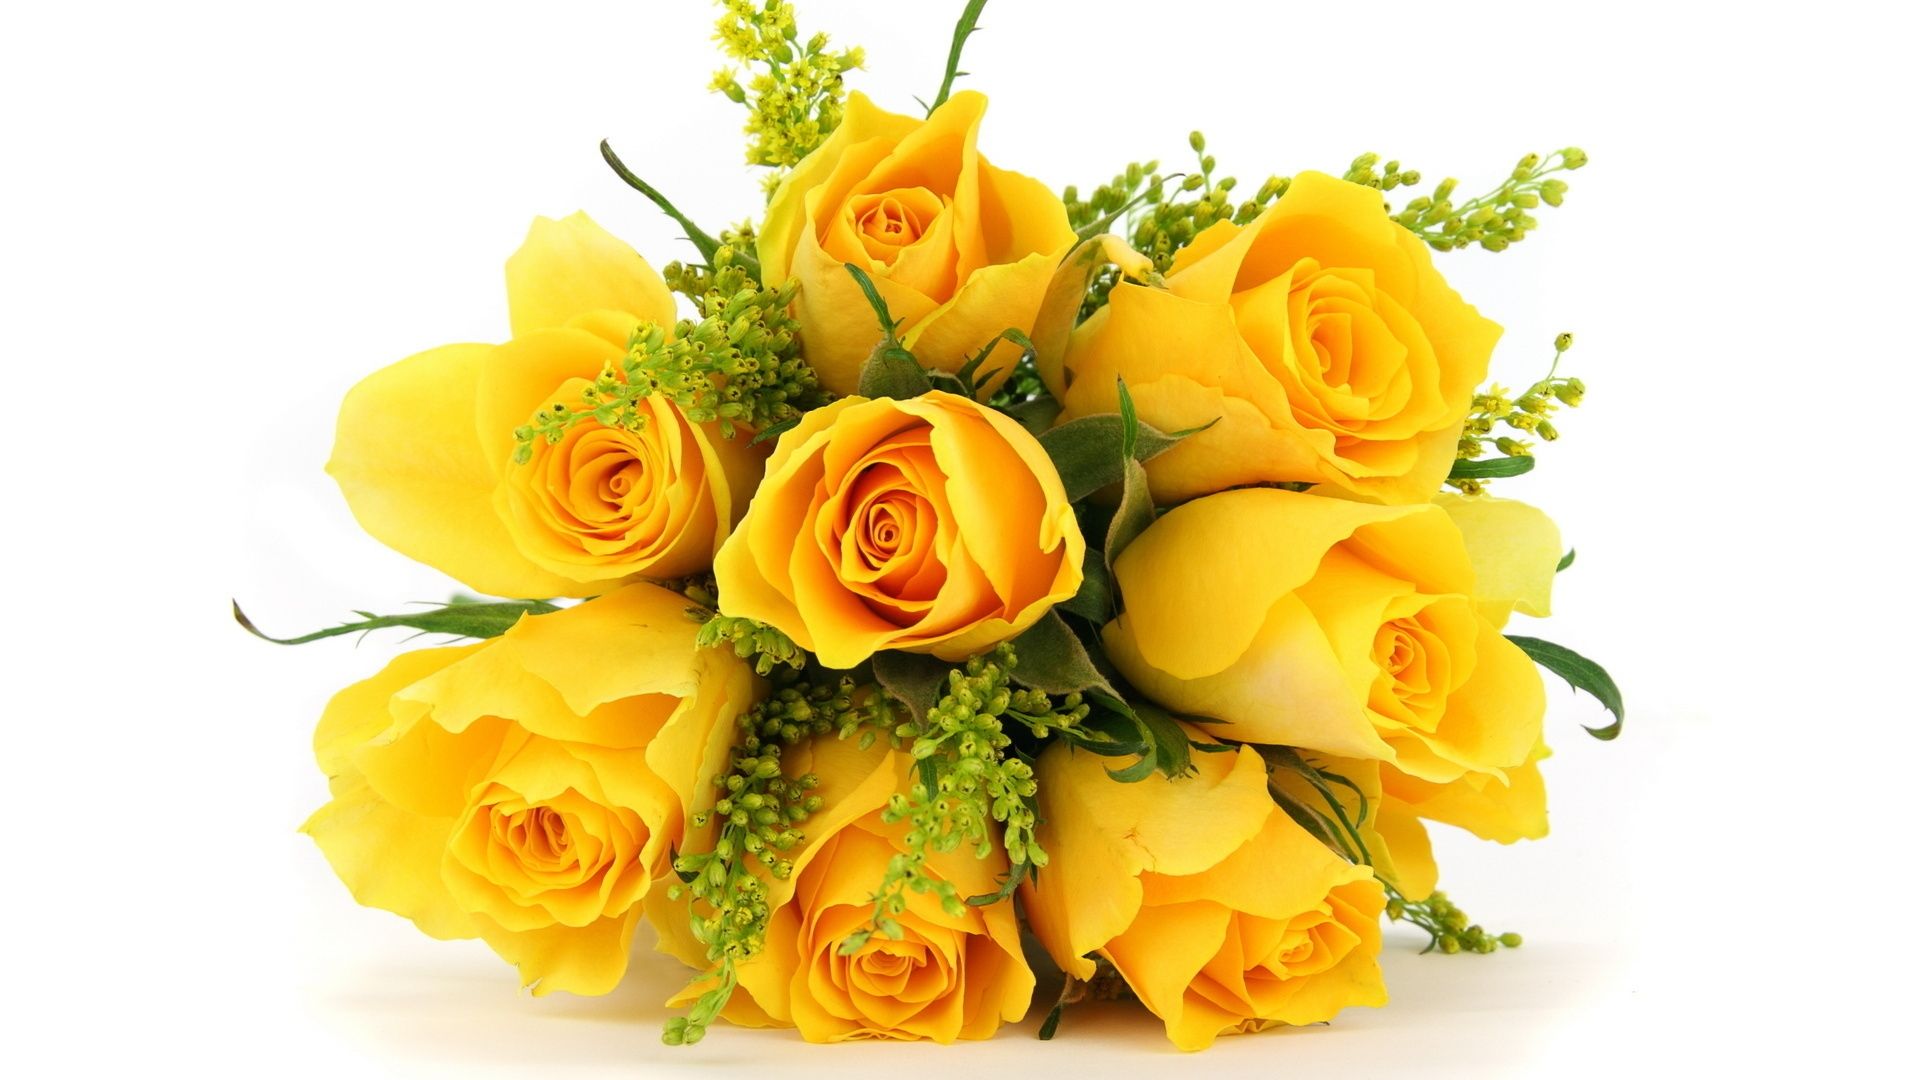 Download Wallpaper 1920x1080 Roses, Flowers, Flower, Yellow, Buds